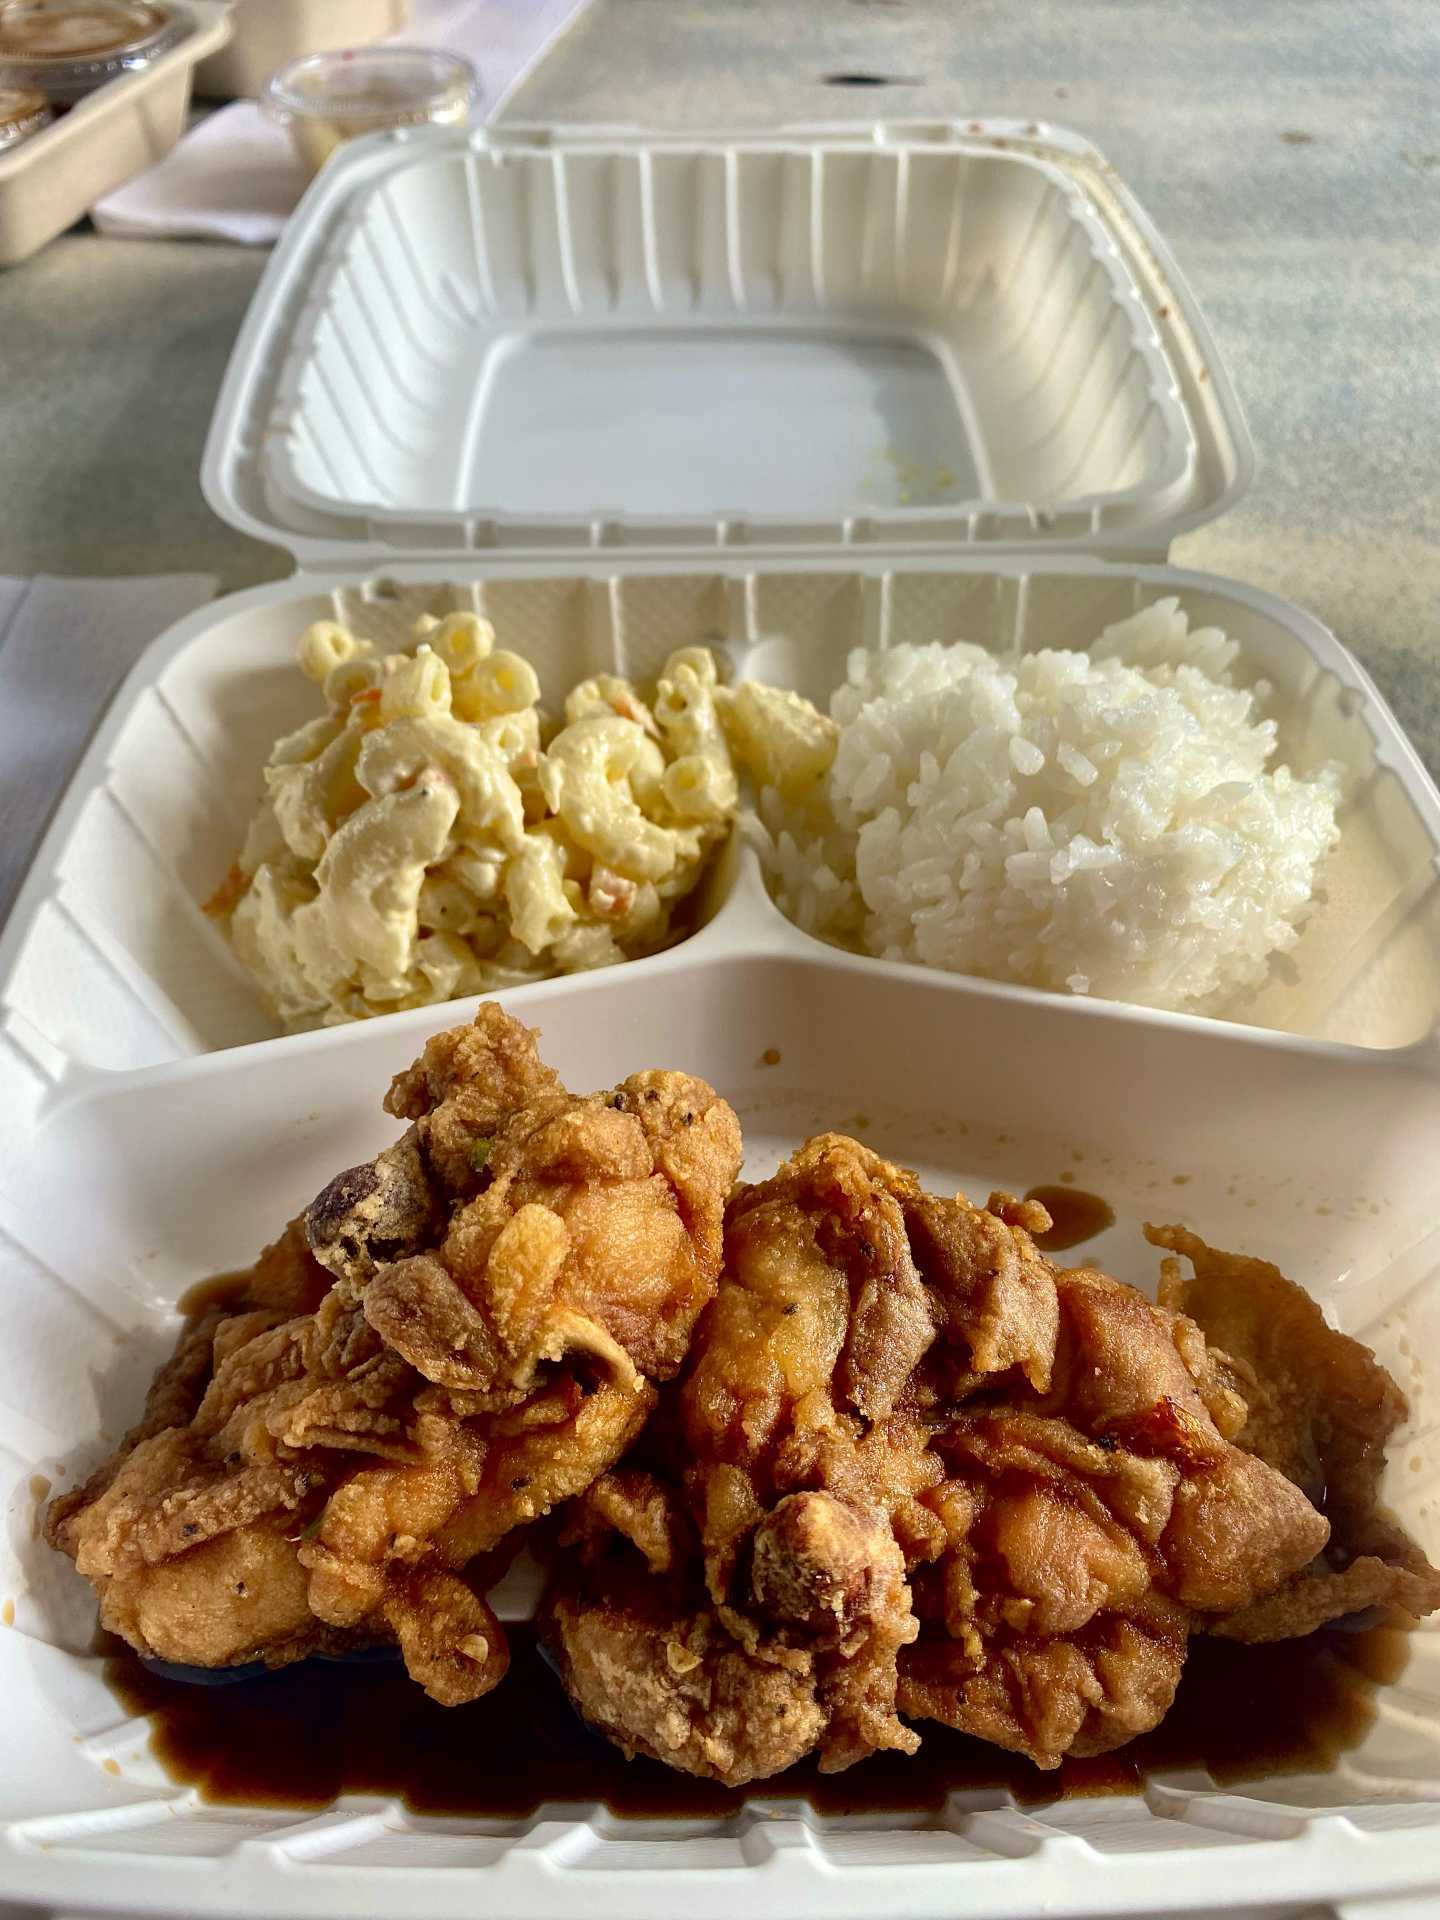 Chili pepper chicken from The Village Snack Shop and Bakery in Hanalei